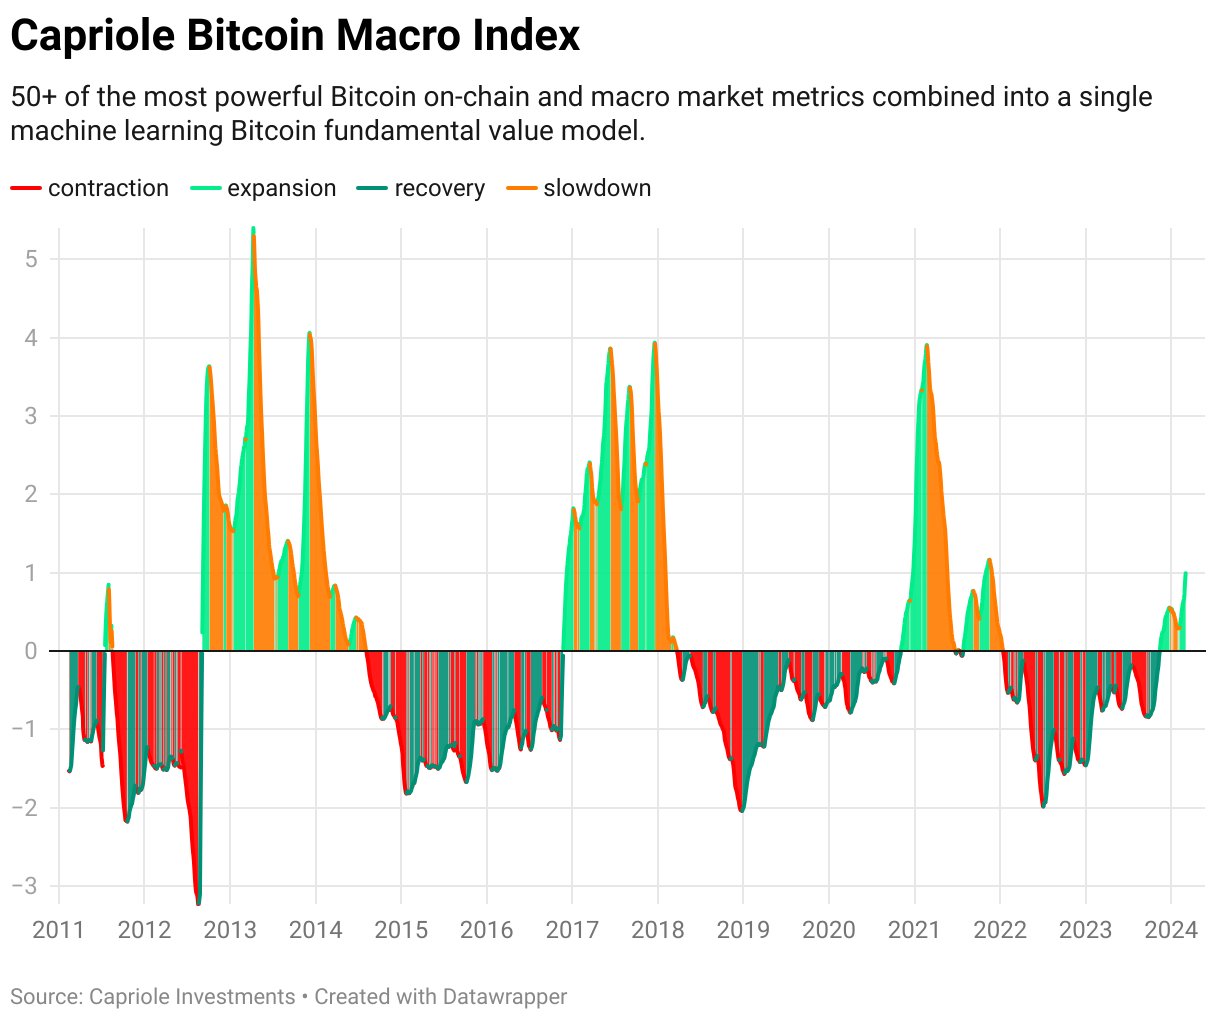 Market research report: BTC breaks ATH and coils ahead of major pump while AI and meme coins rule the charts - BTC Macro Index